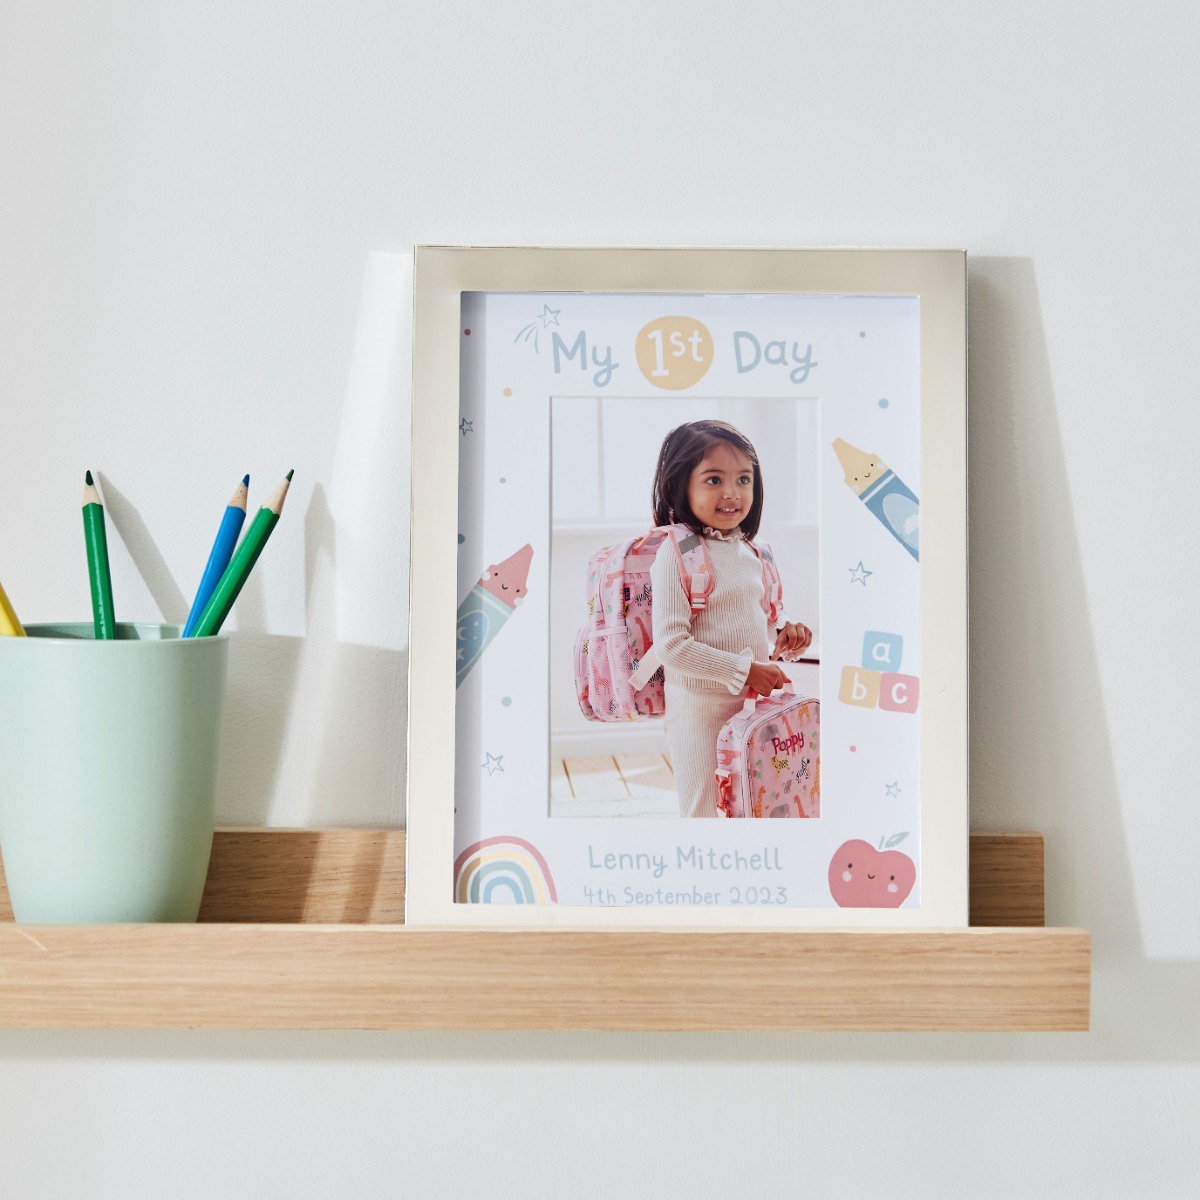 Personalised My 1st Day Photo Frame